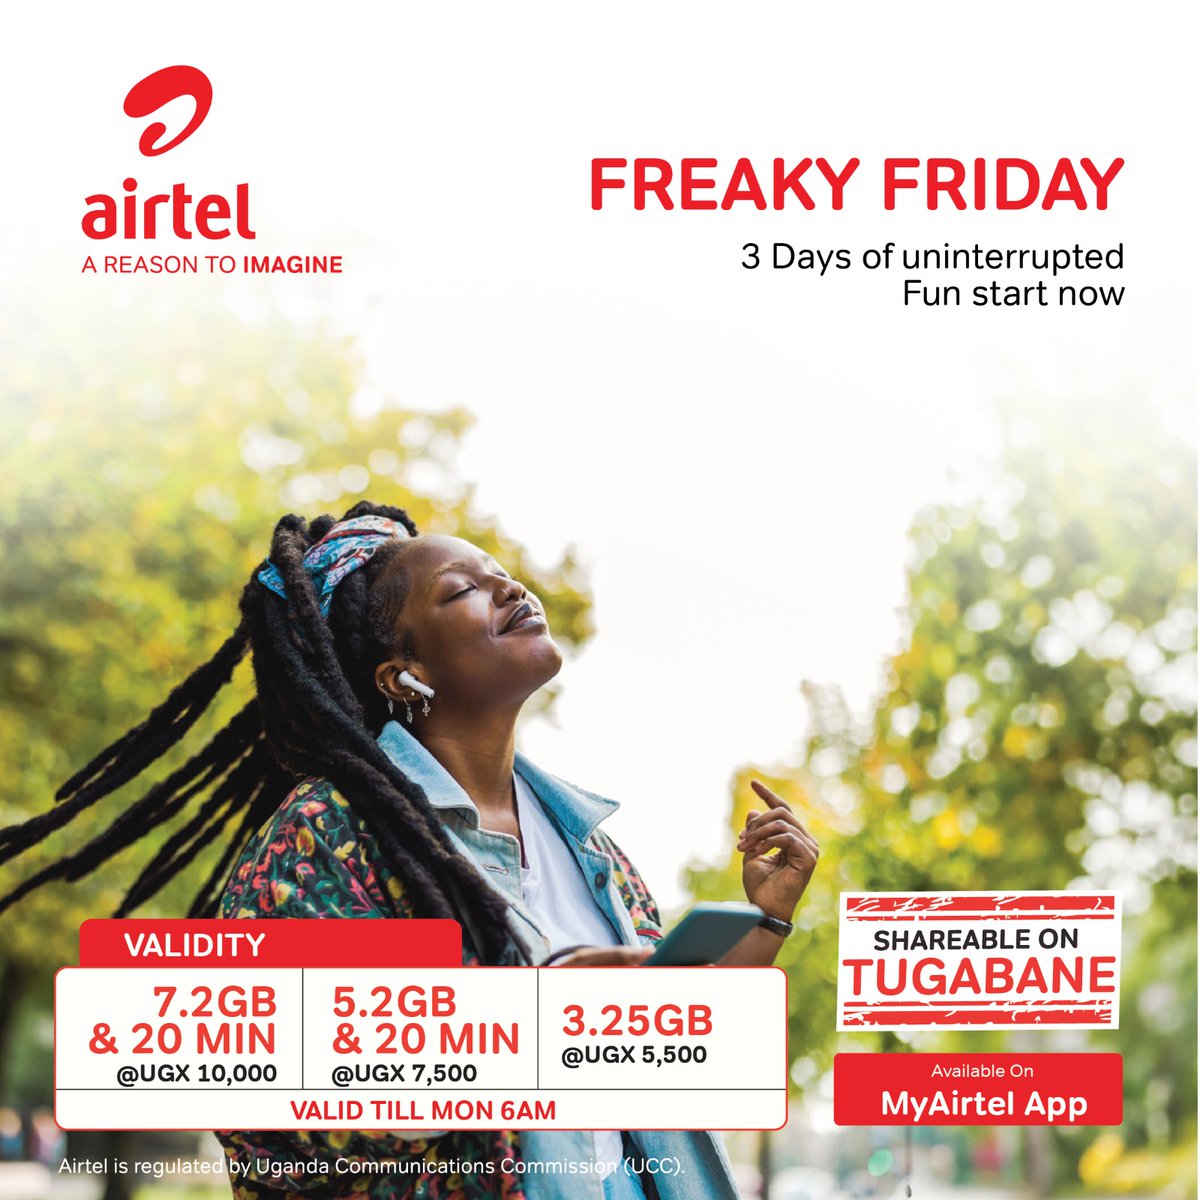 It's a weekend dont be bored because @Airtel_Ug is here to make you enjoy.
Dial *100# and choose option 0  to get your preferred bundle or use #MyAirtelApp 👇 airtelafrica.onelink.me/cGyr/qgj4qeu2
#FreakyBundles♥️